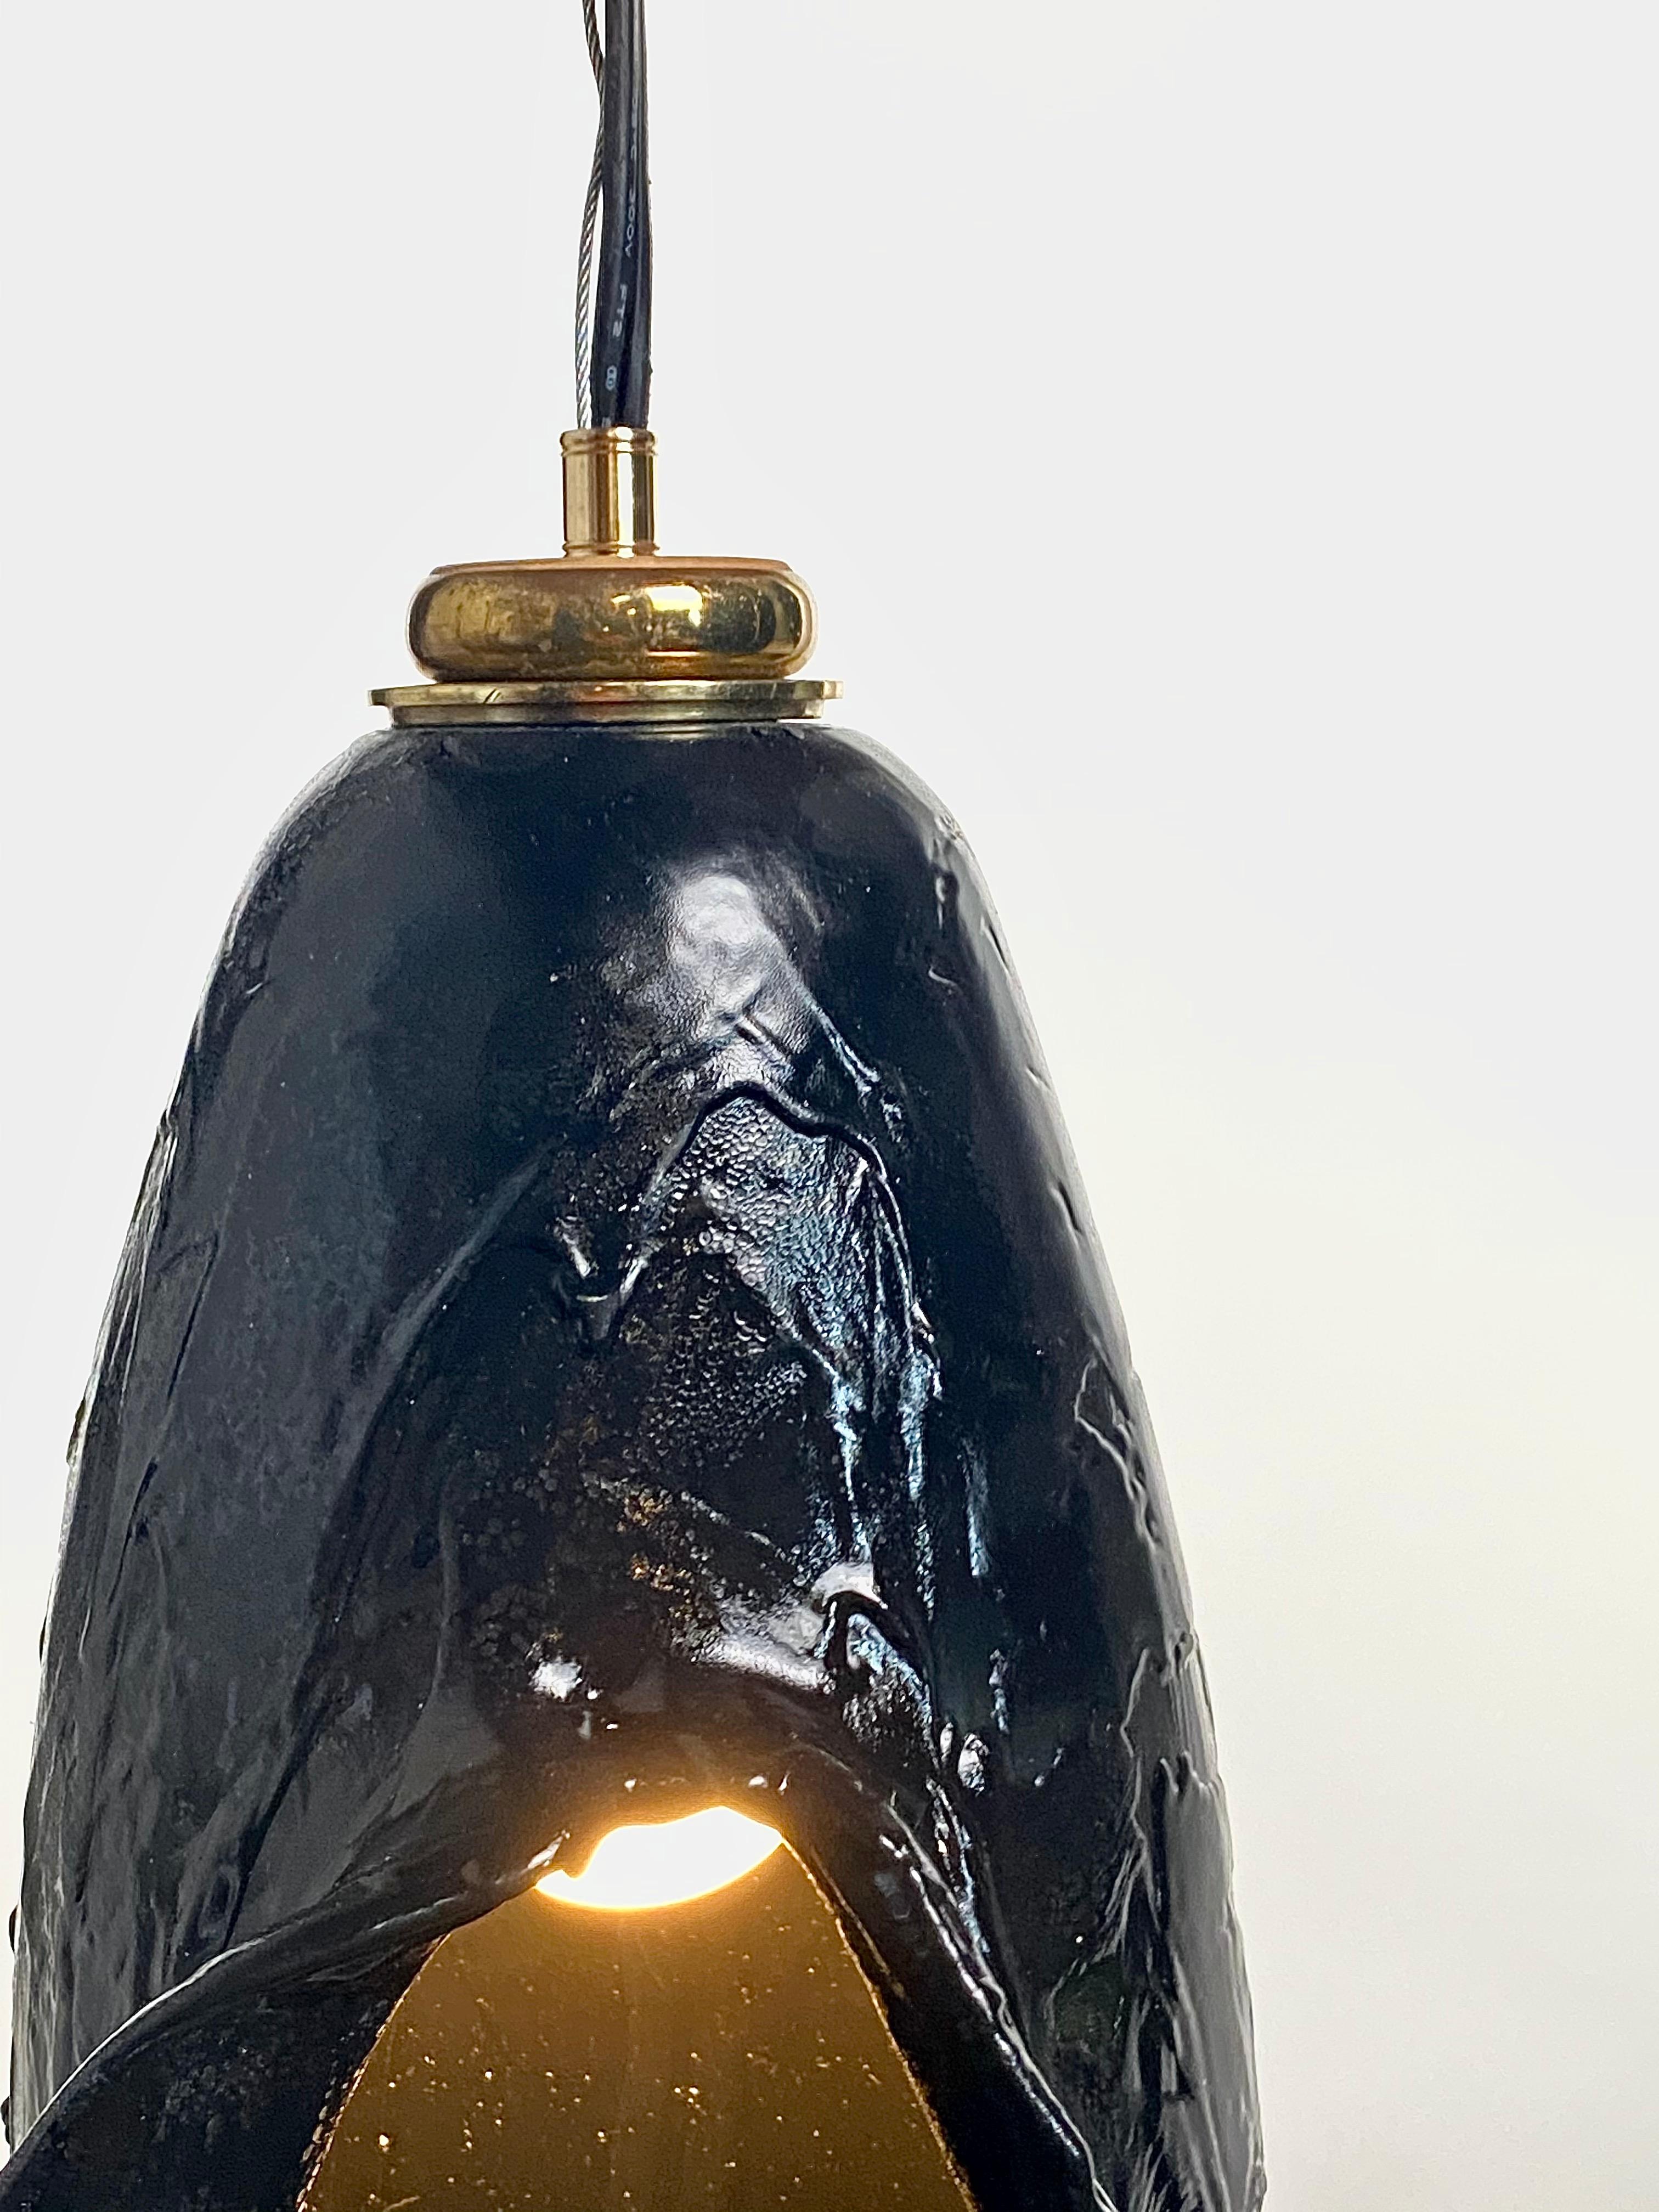 Blown Glass Black Rubber Pendent or Table Light, 21st Century by Mattia Biagi For Sale 3